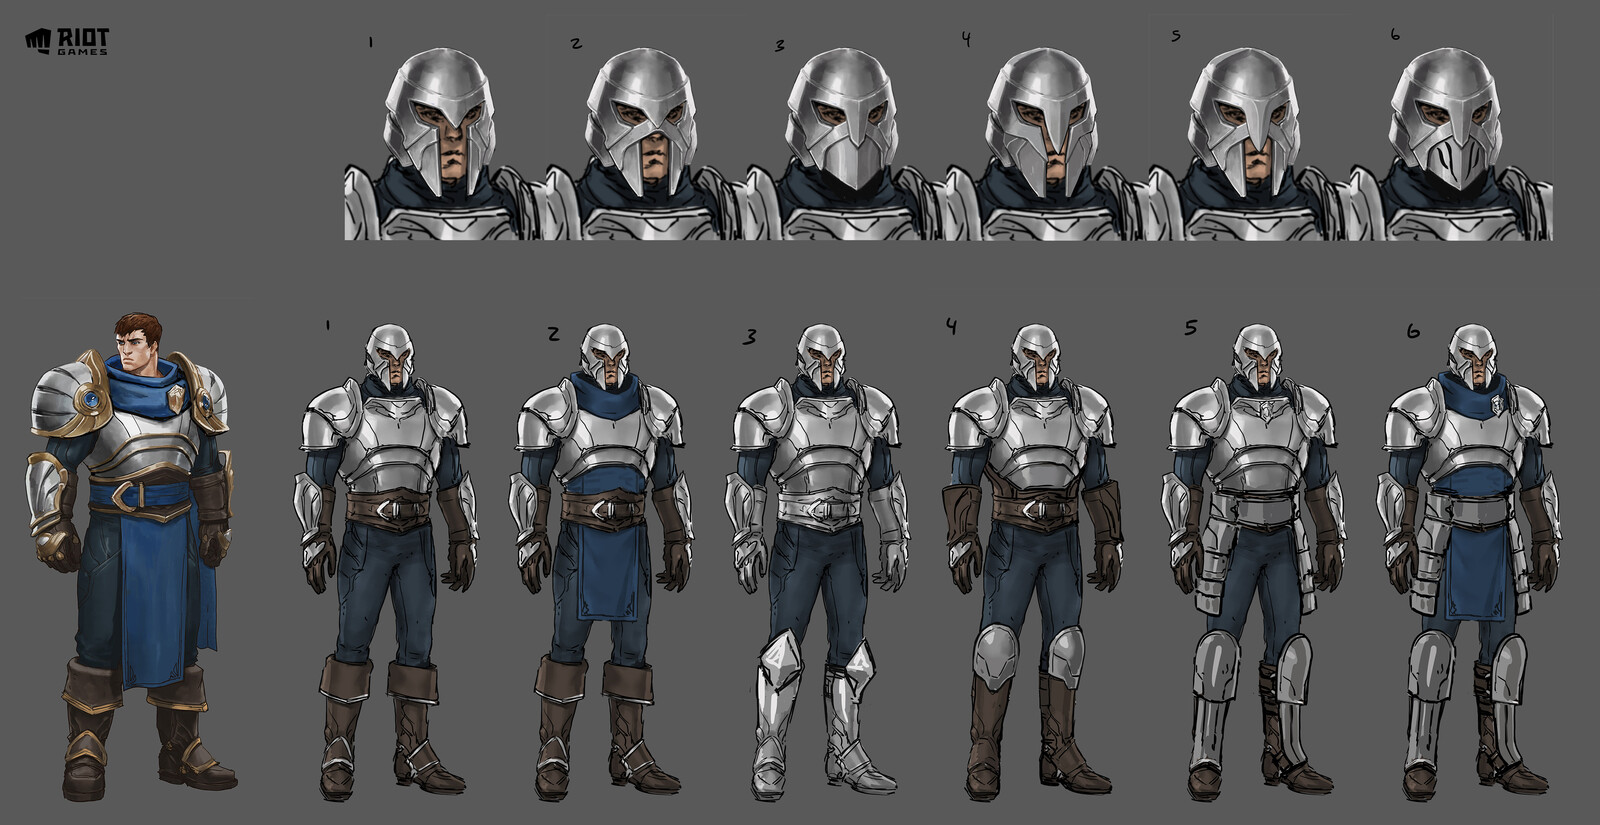 Concepts for the Demacian soldiers.